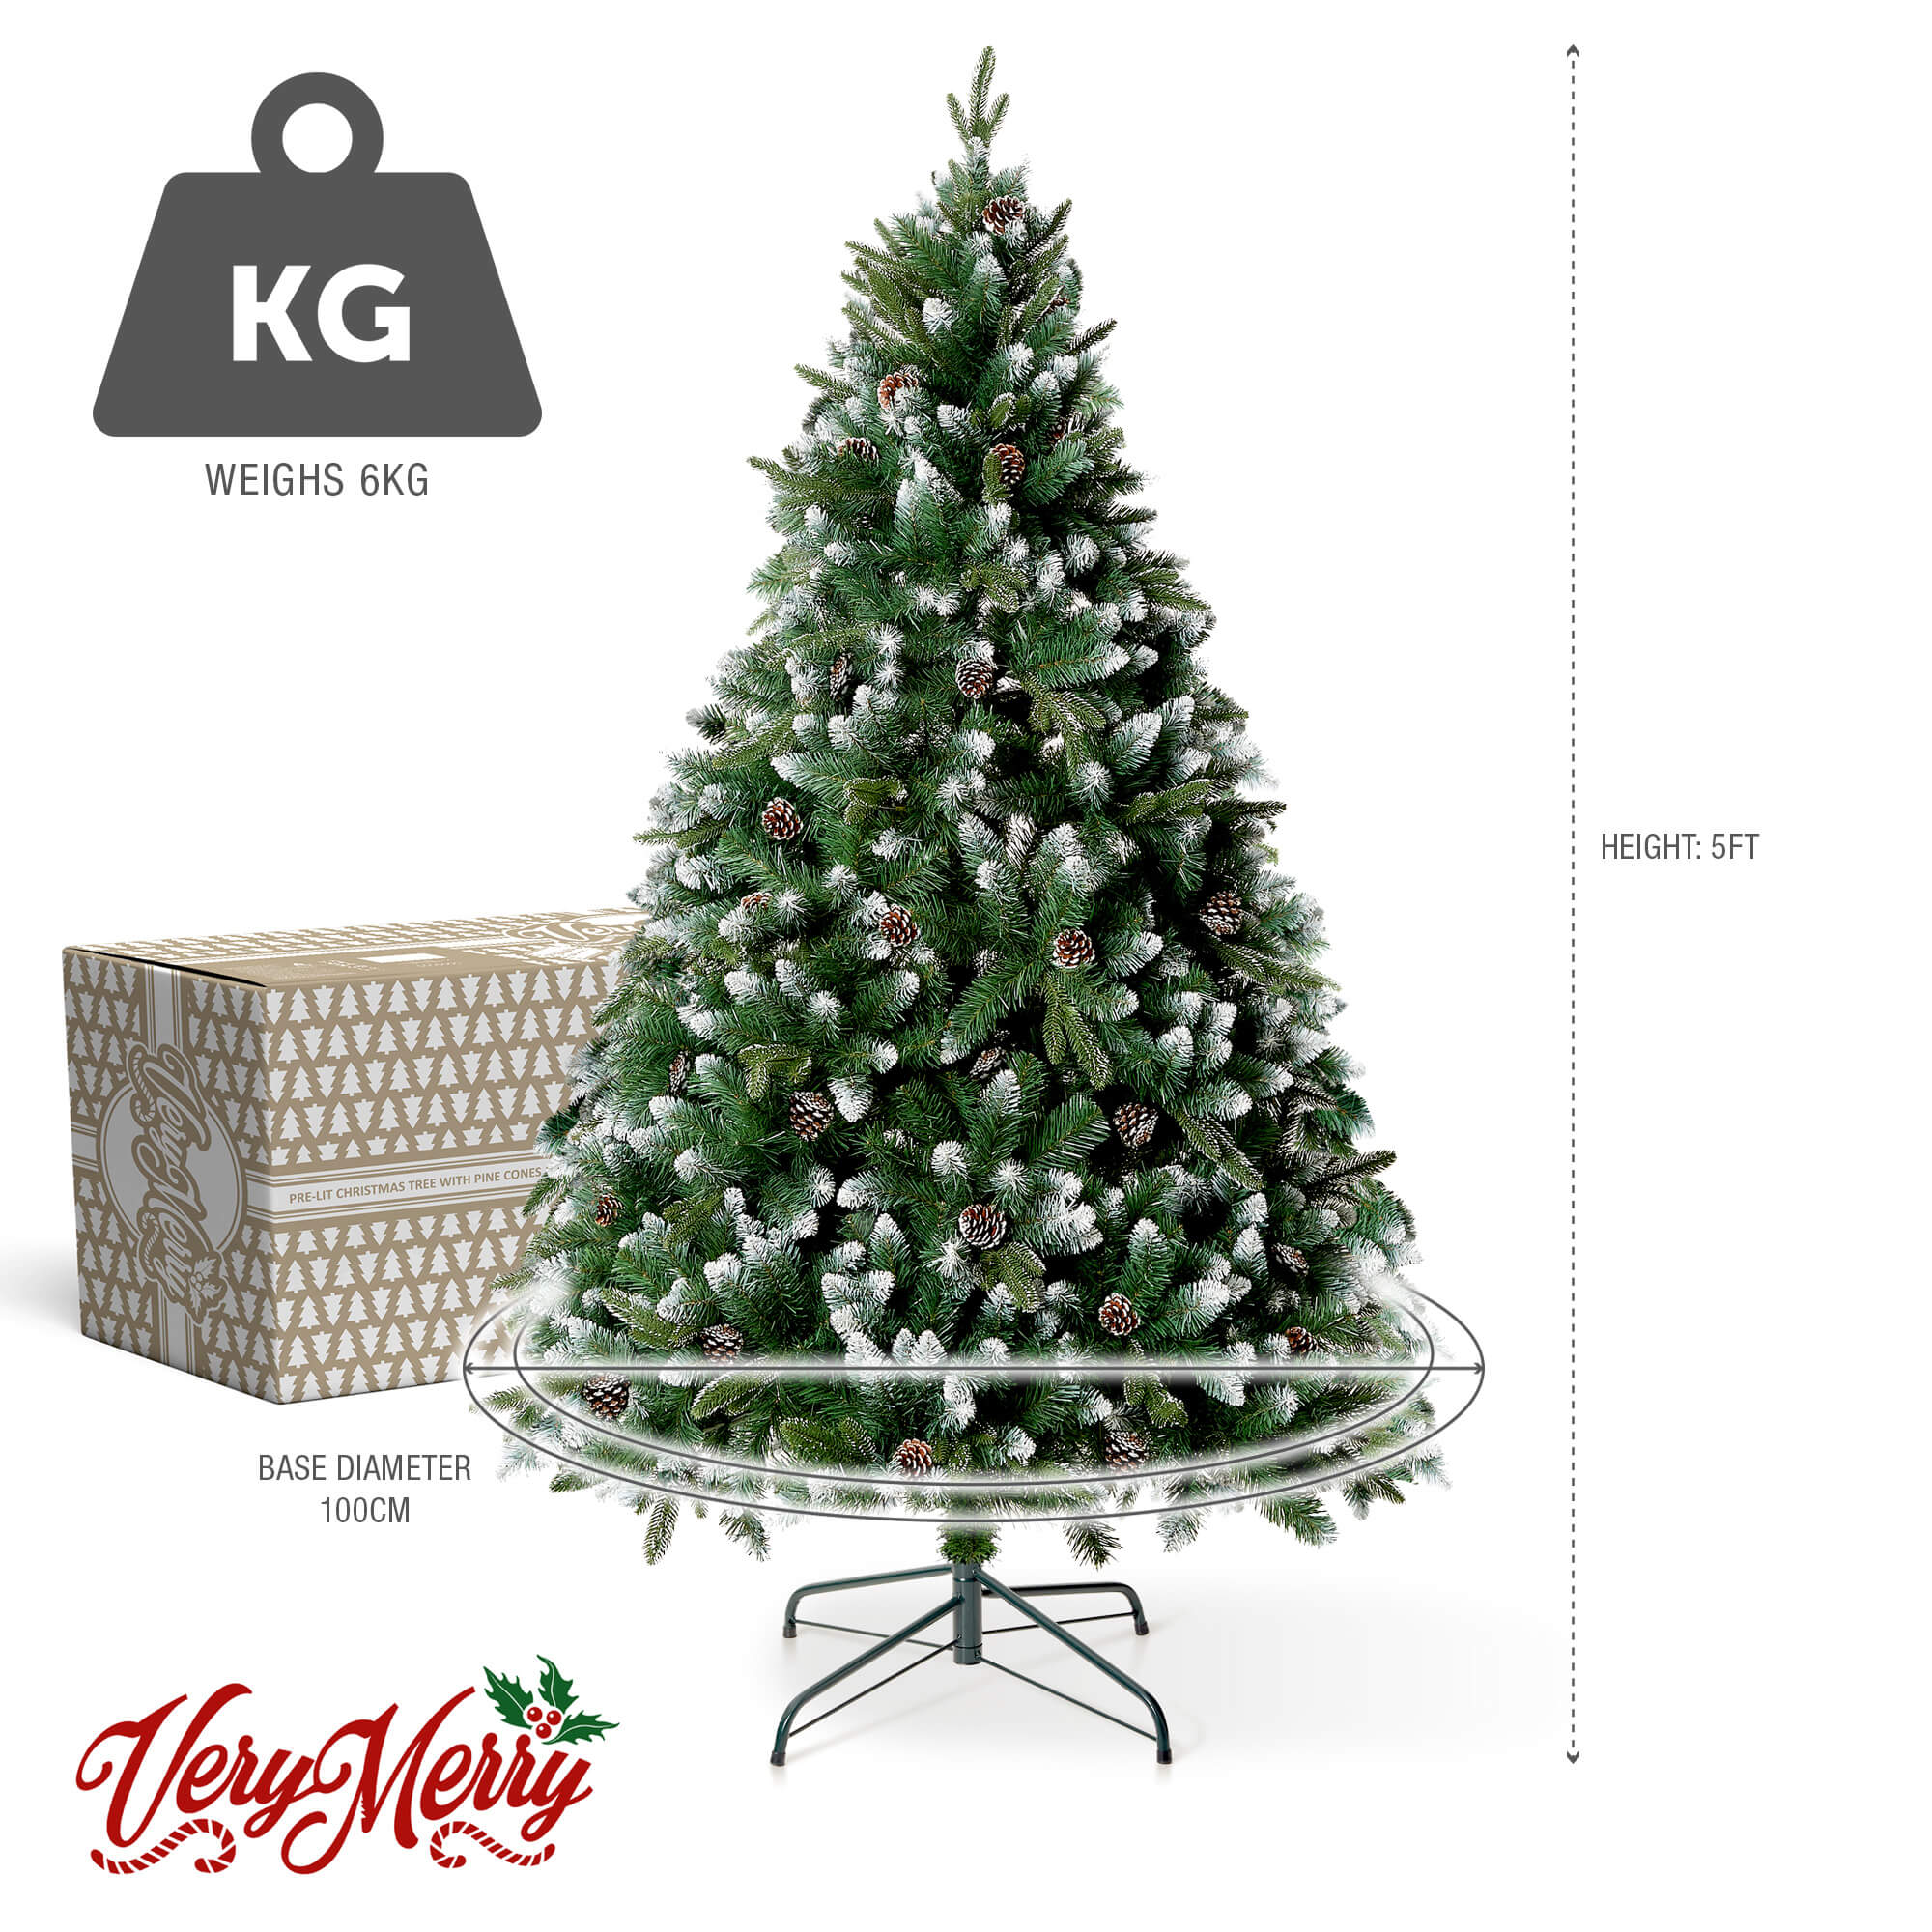 5FT Glacier Frosted Christmas Tree with Decorative Pinecones